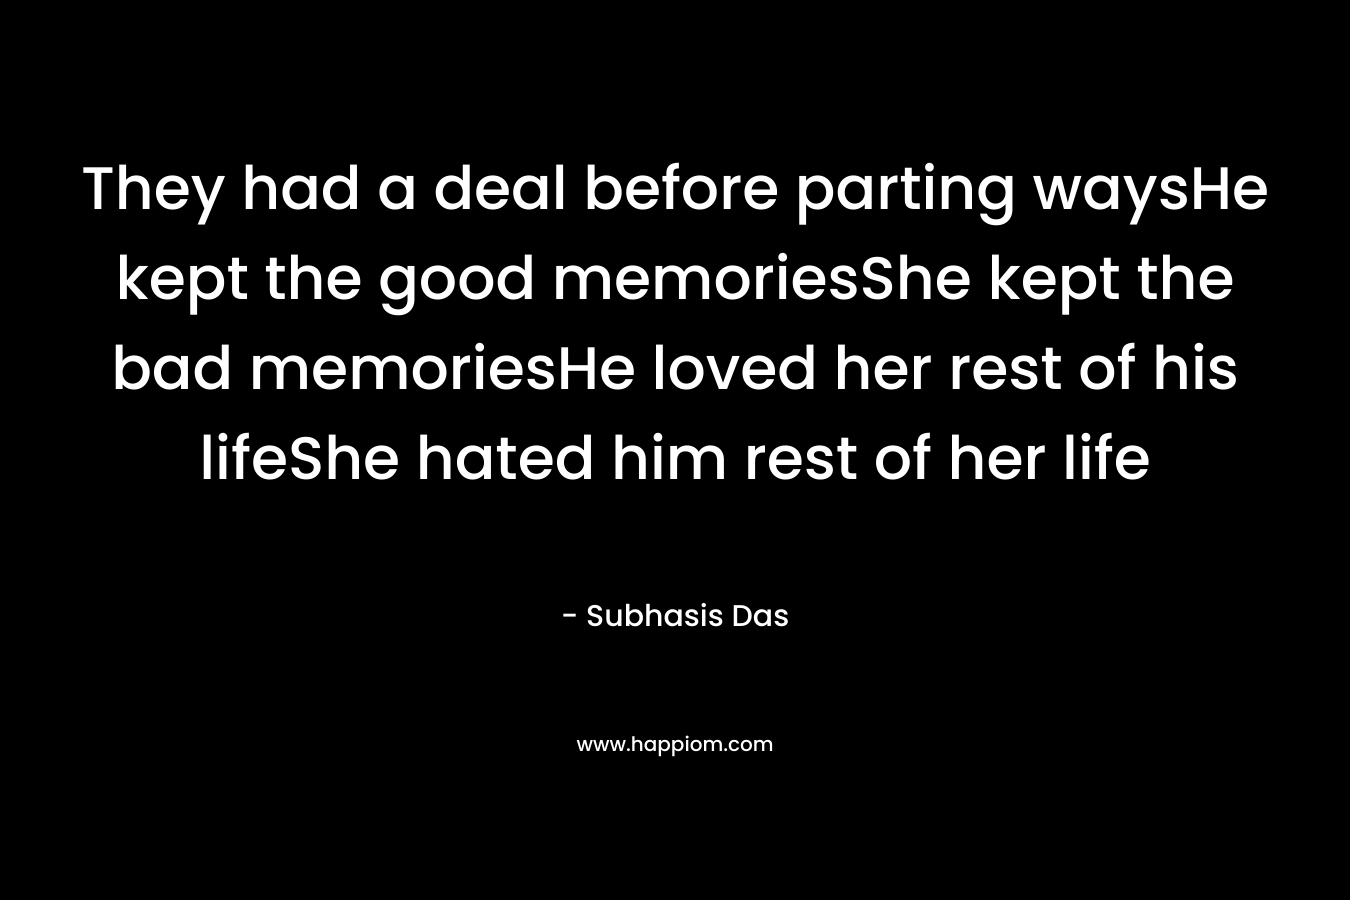 They had a deal before parting waysHe kept the good memoriesShe kept the bad memoriesHe loved her rest of his lifeShe hated him rest of her life